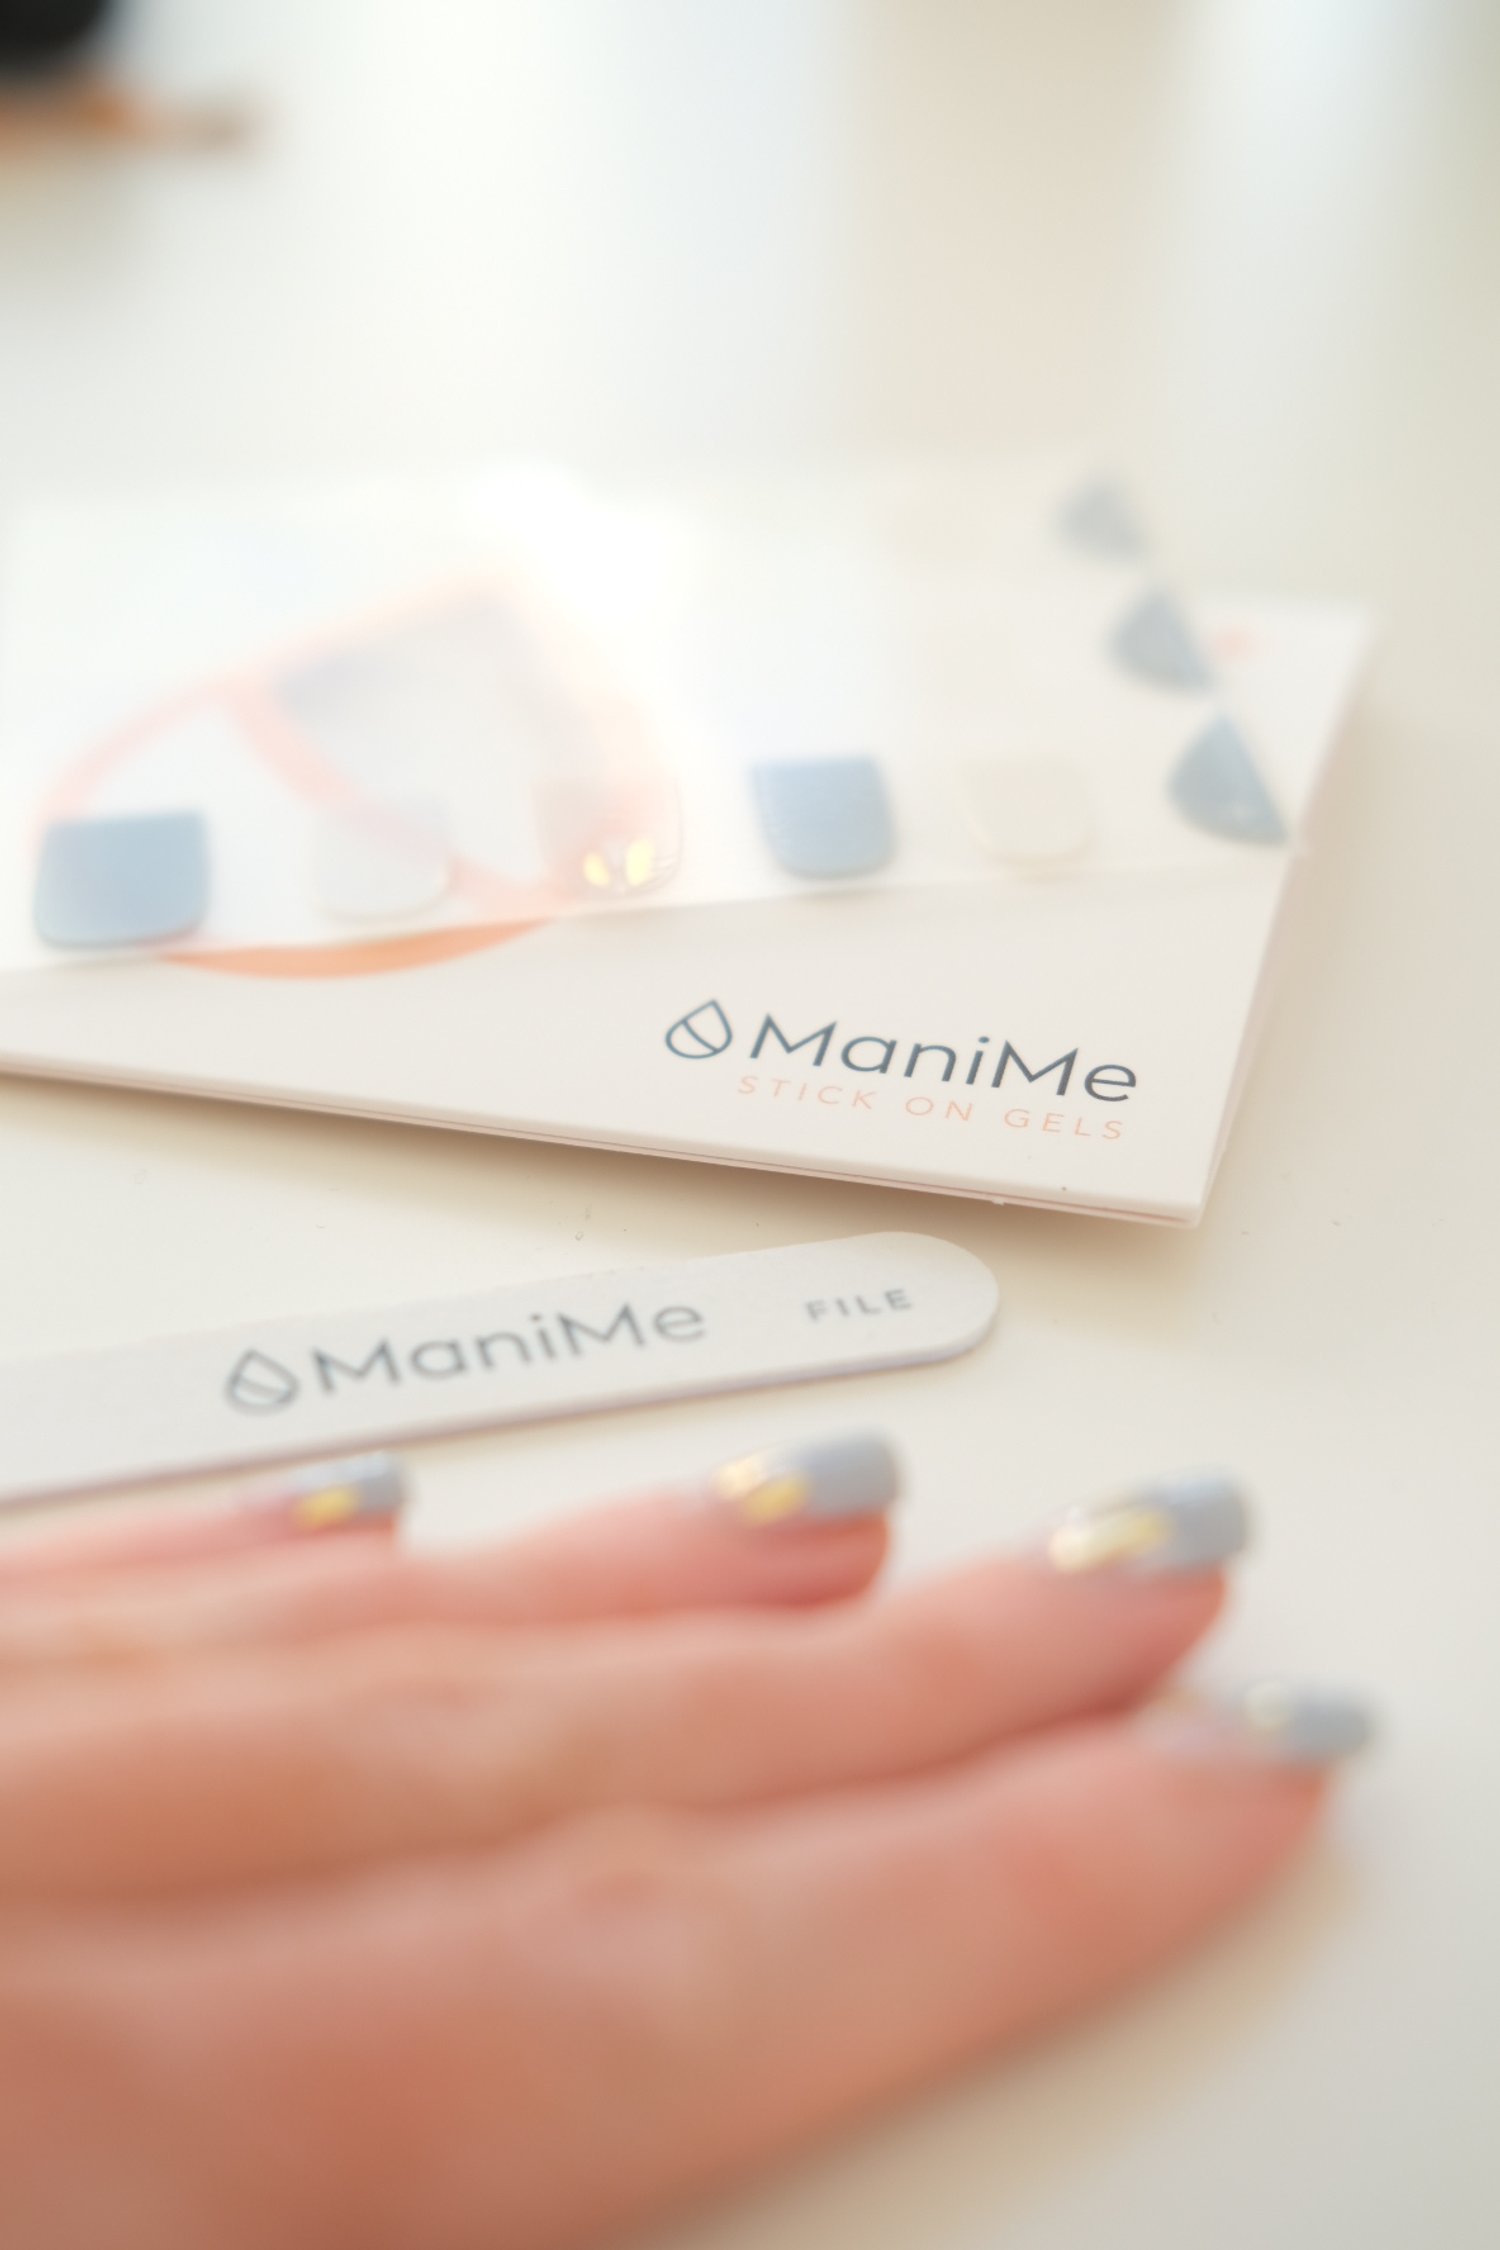 In this ManiMe review, I’ll go through my honest review of ManiMe nails and give you my top tips on how to make your ManiMe gel nails last longer. I also have a ManiMe discount code that can be used for 20% off your first purchase of ManiMe nails. Th